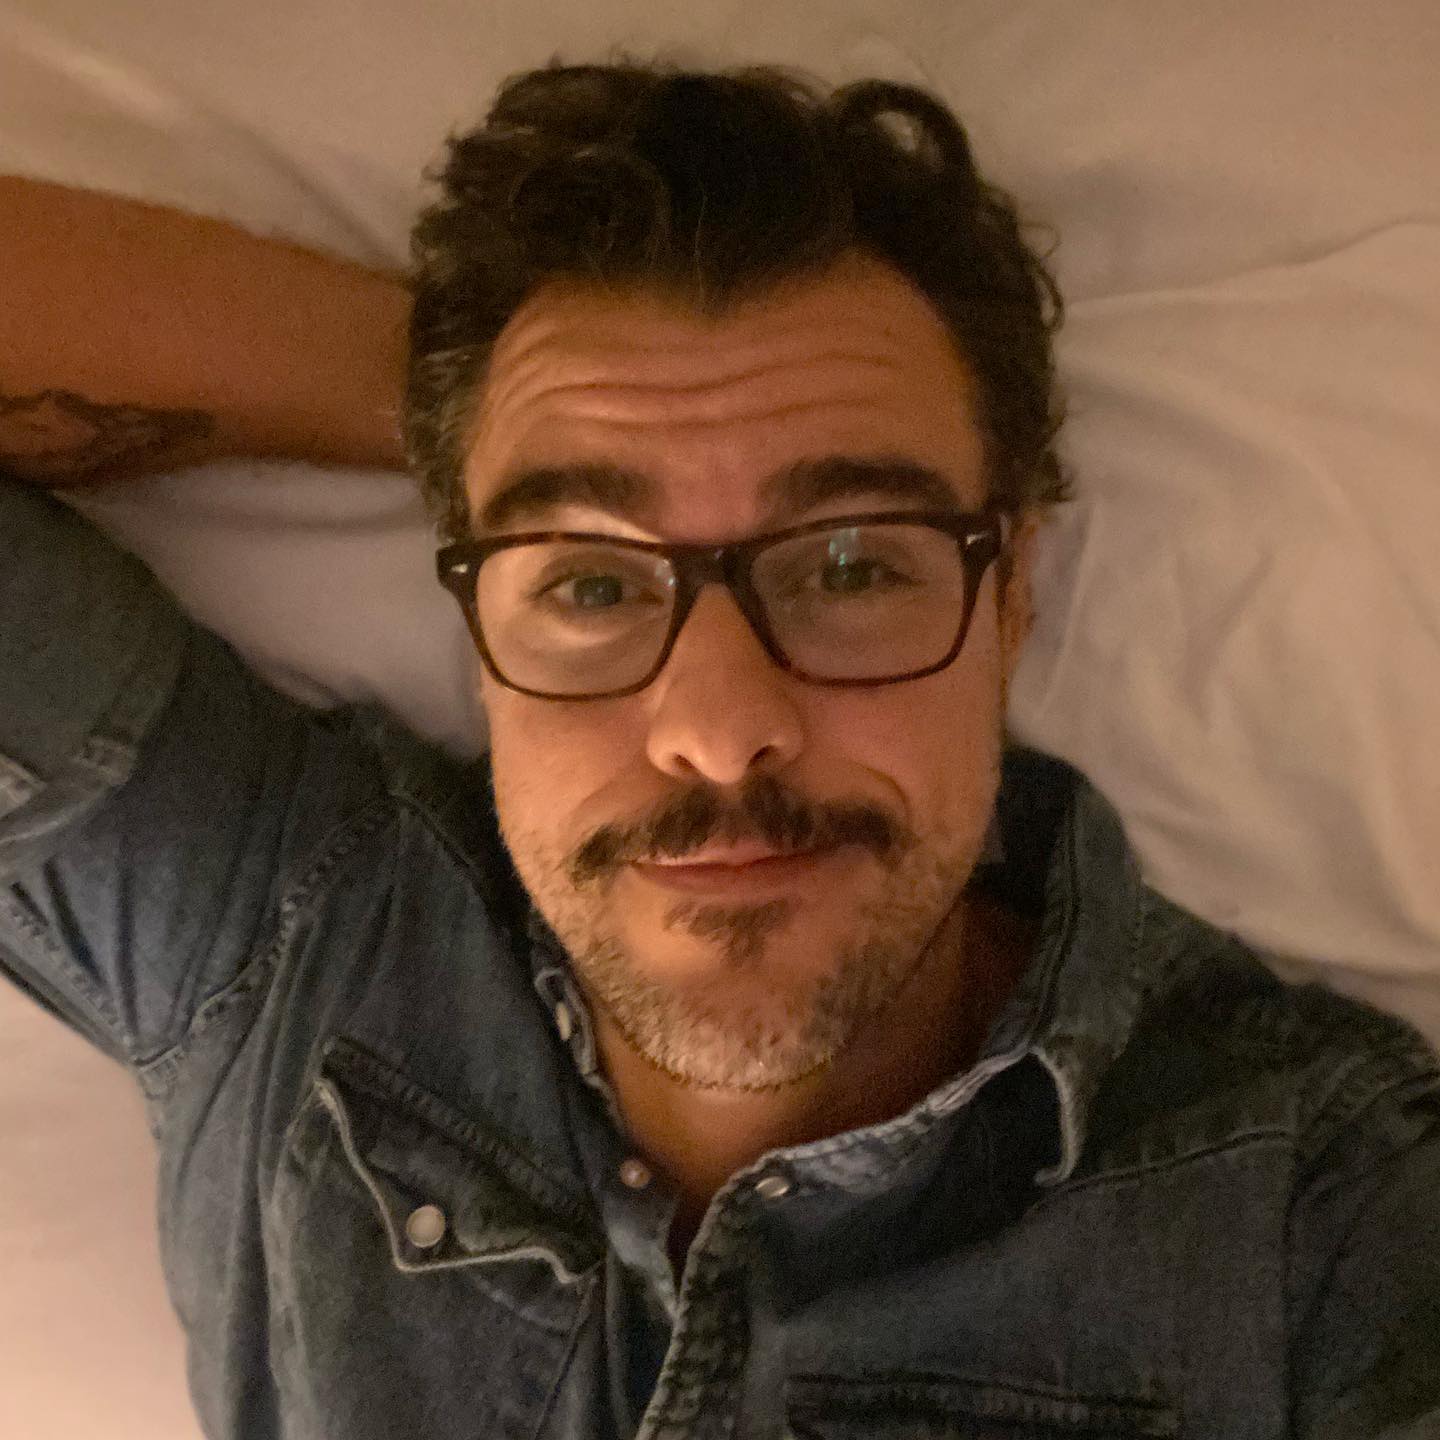 https://e.radikal.host/2023/04/22/Photo-by-Joaquim-Lopes-on-March-31-2023.-May-be-a-selfie-of-1-person-beard-eyeglasses-and-bedroom..jpg